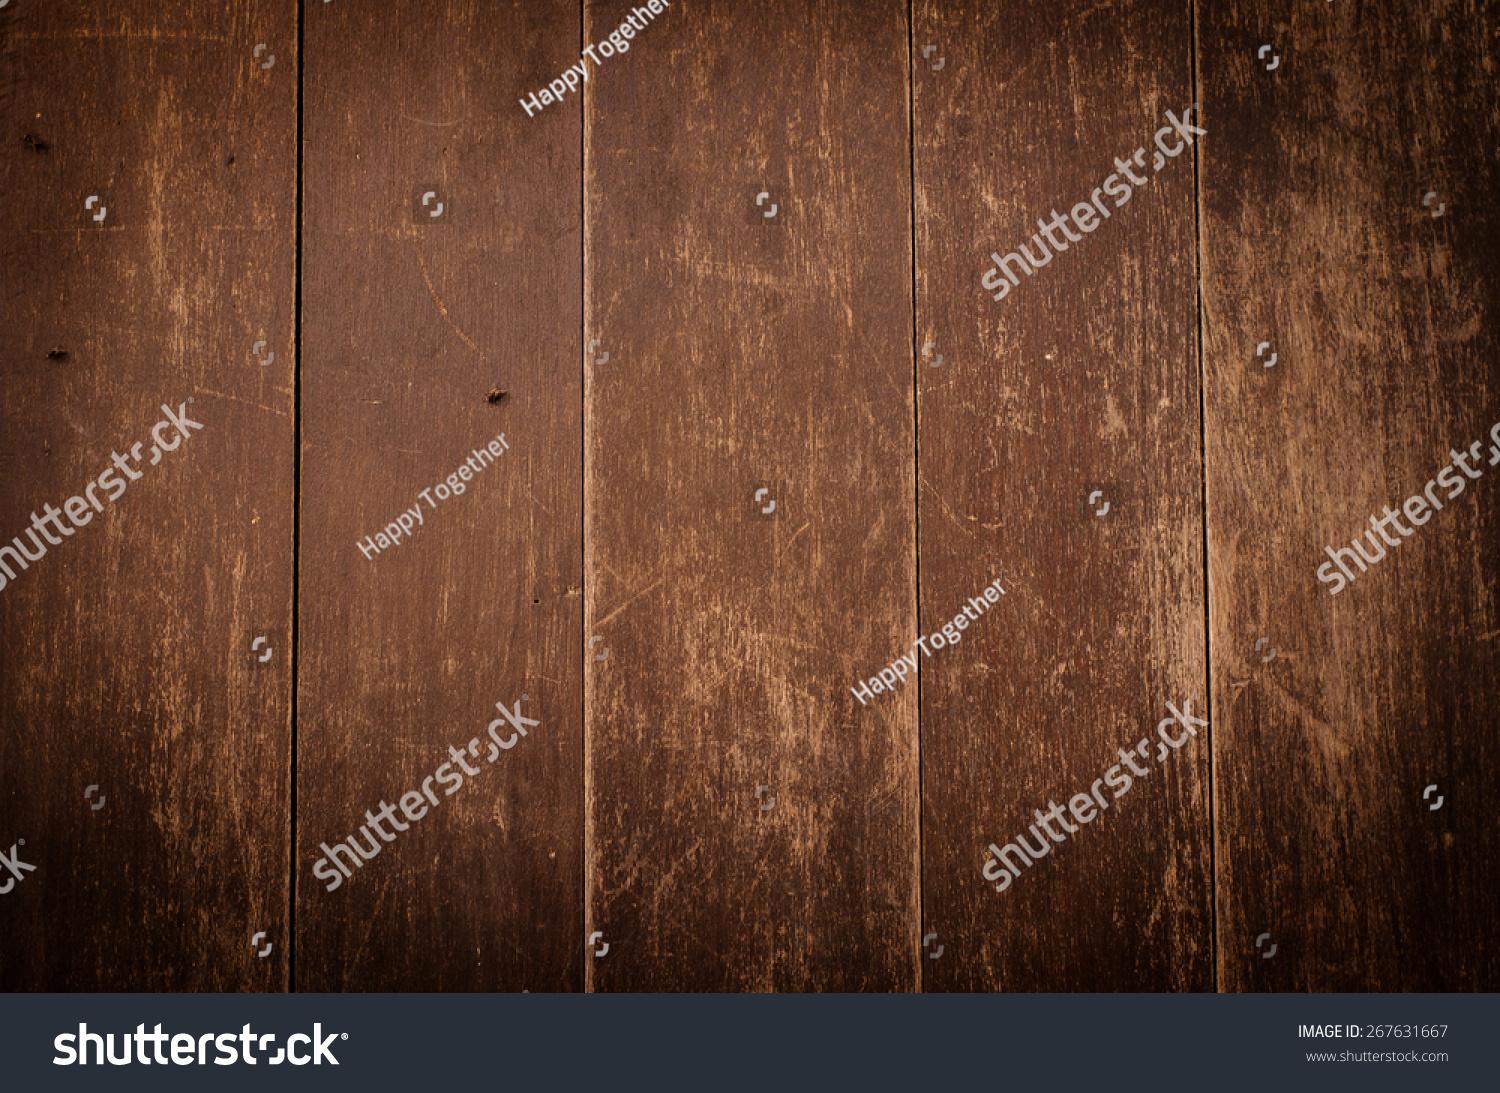 Wood texture background. #267631667